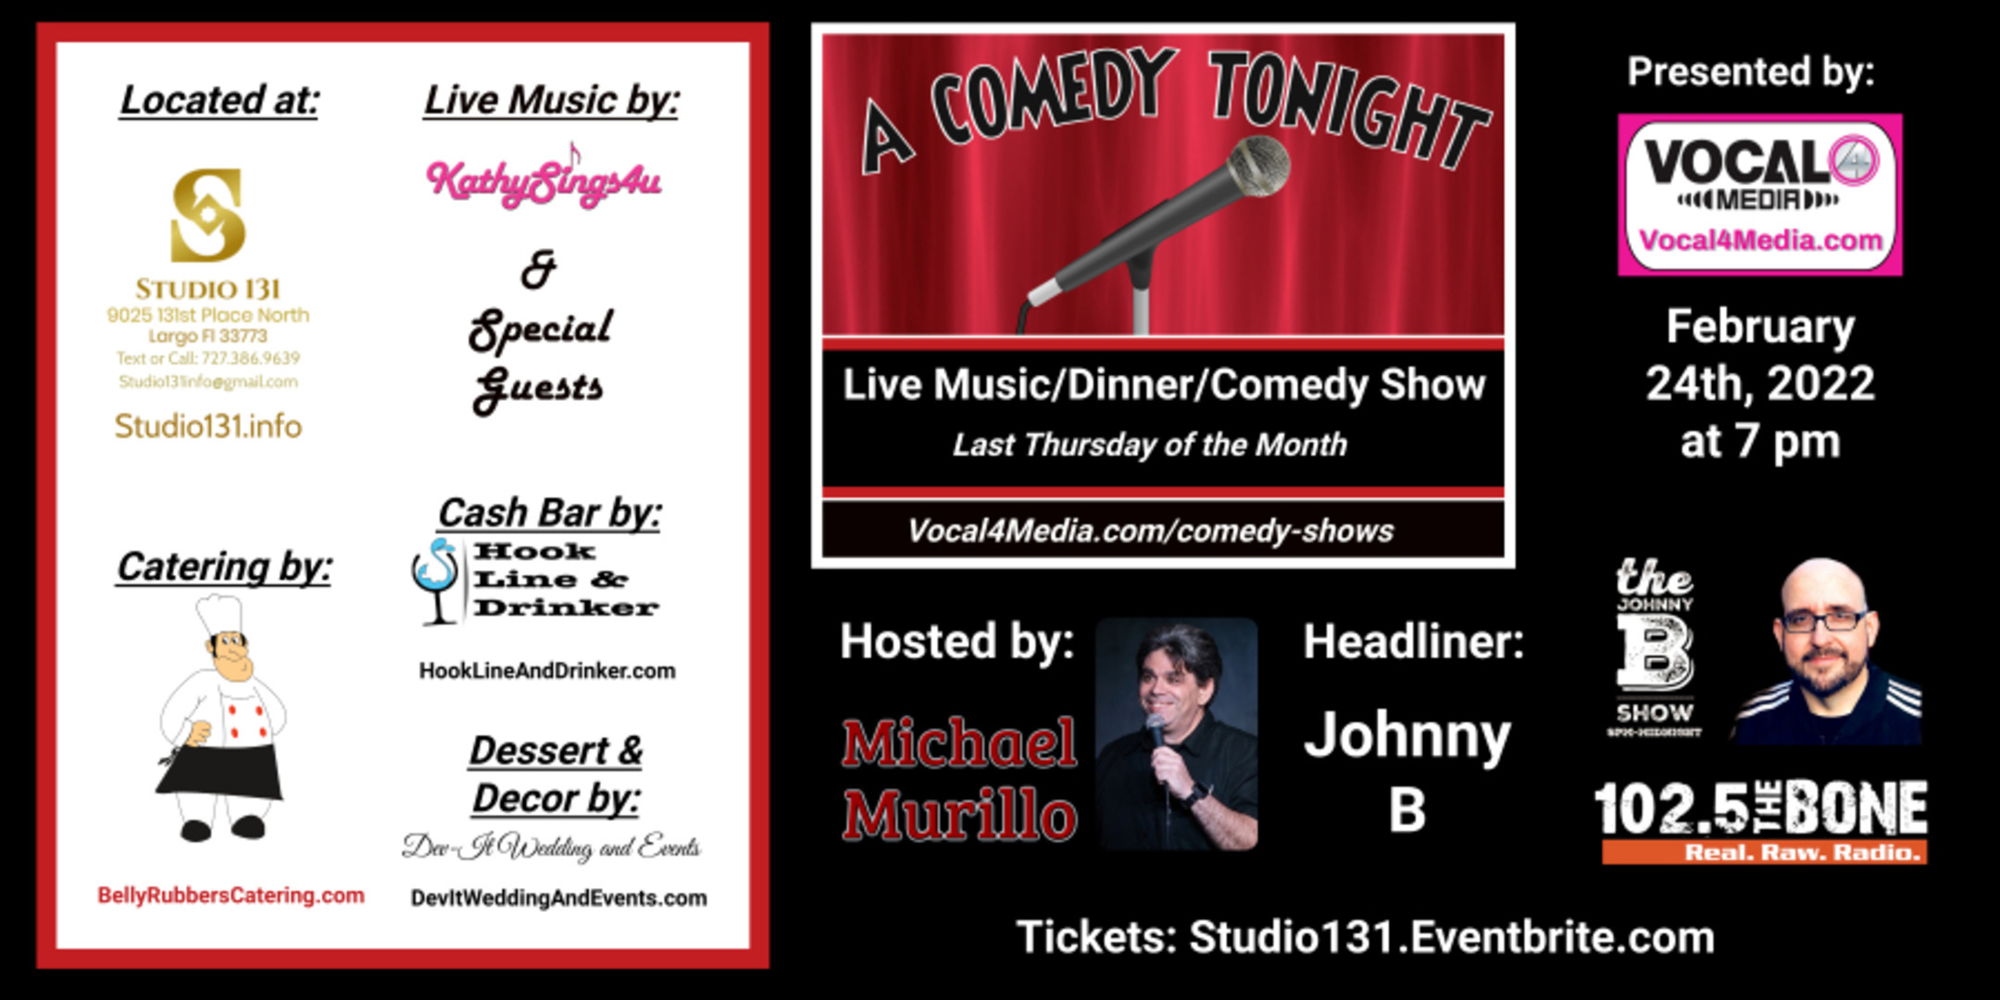 A Comedy Tonight with Johnny B and Host Michael Murillo promotional image